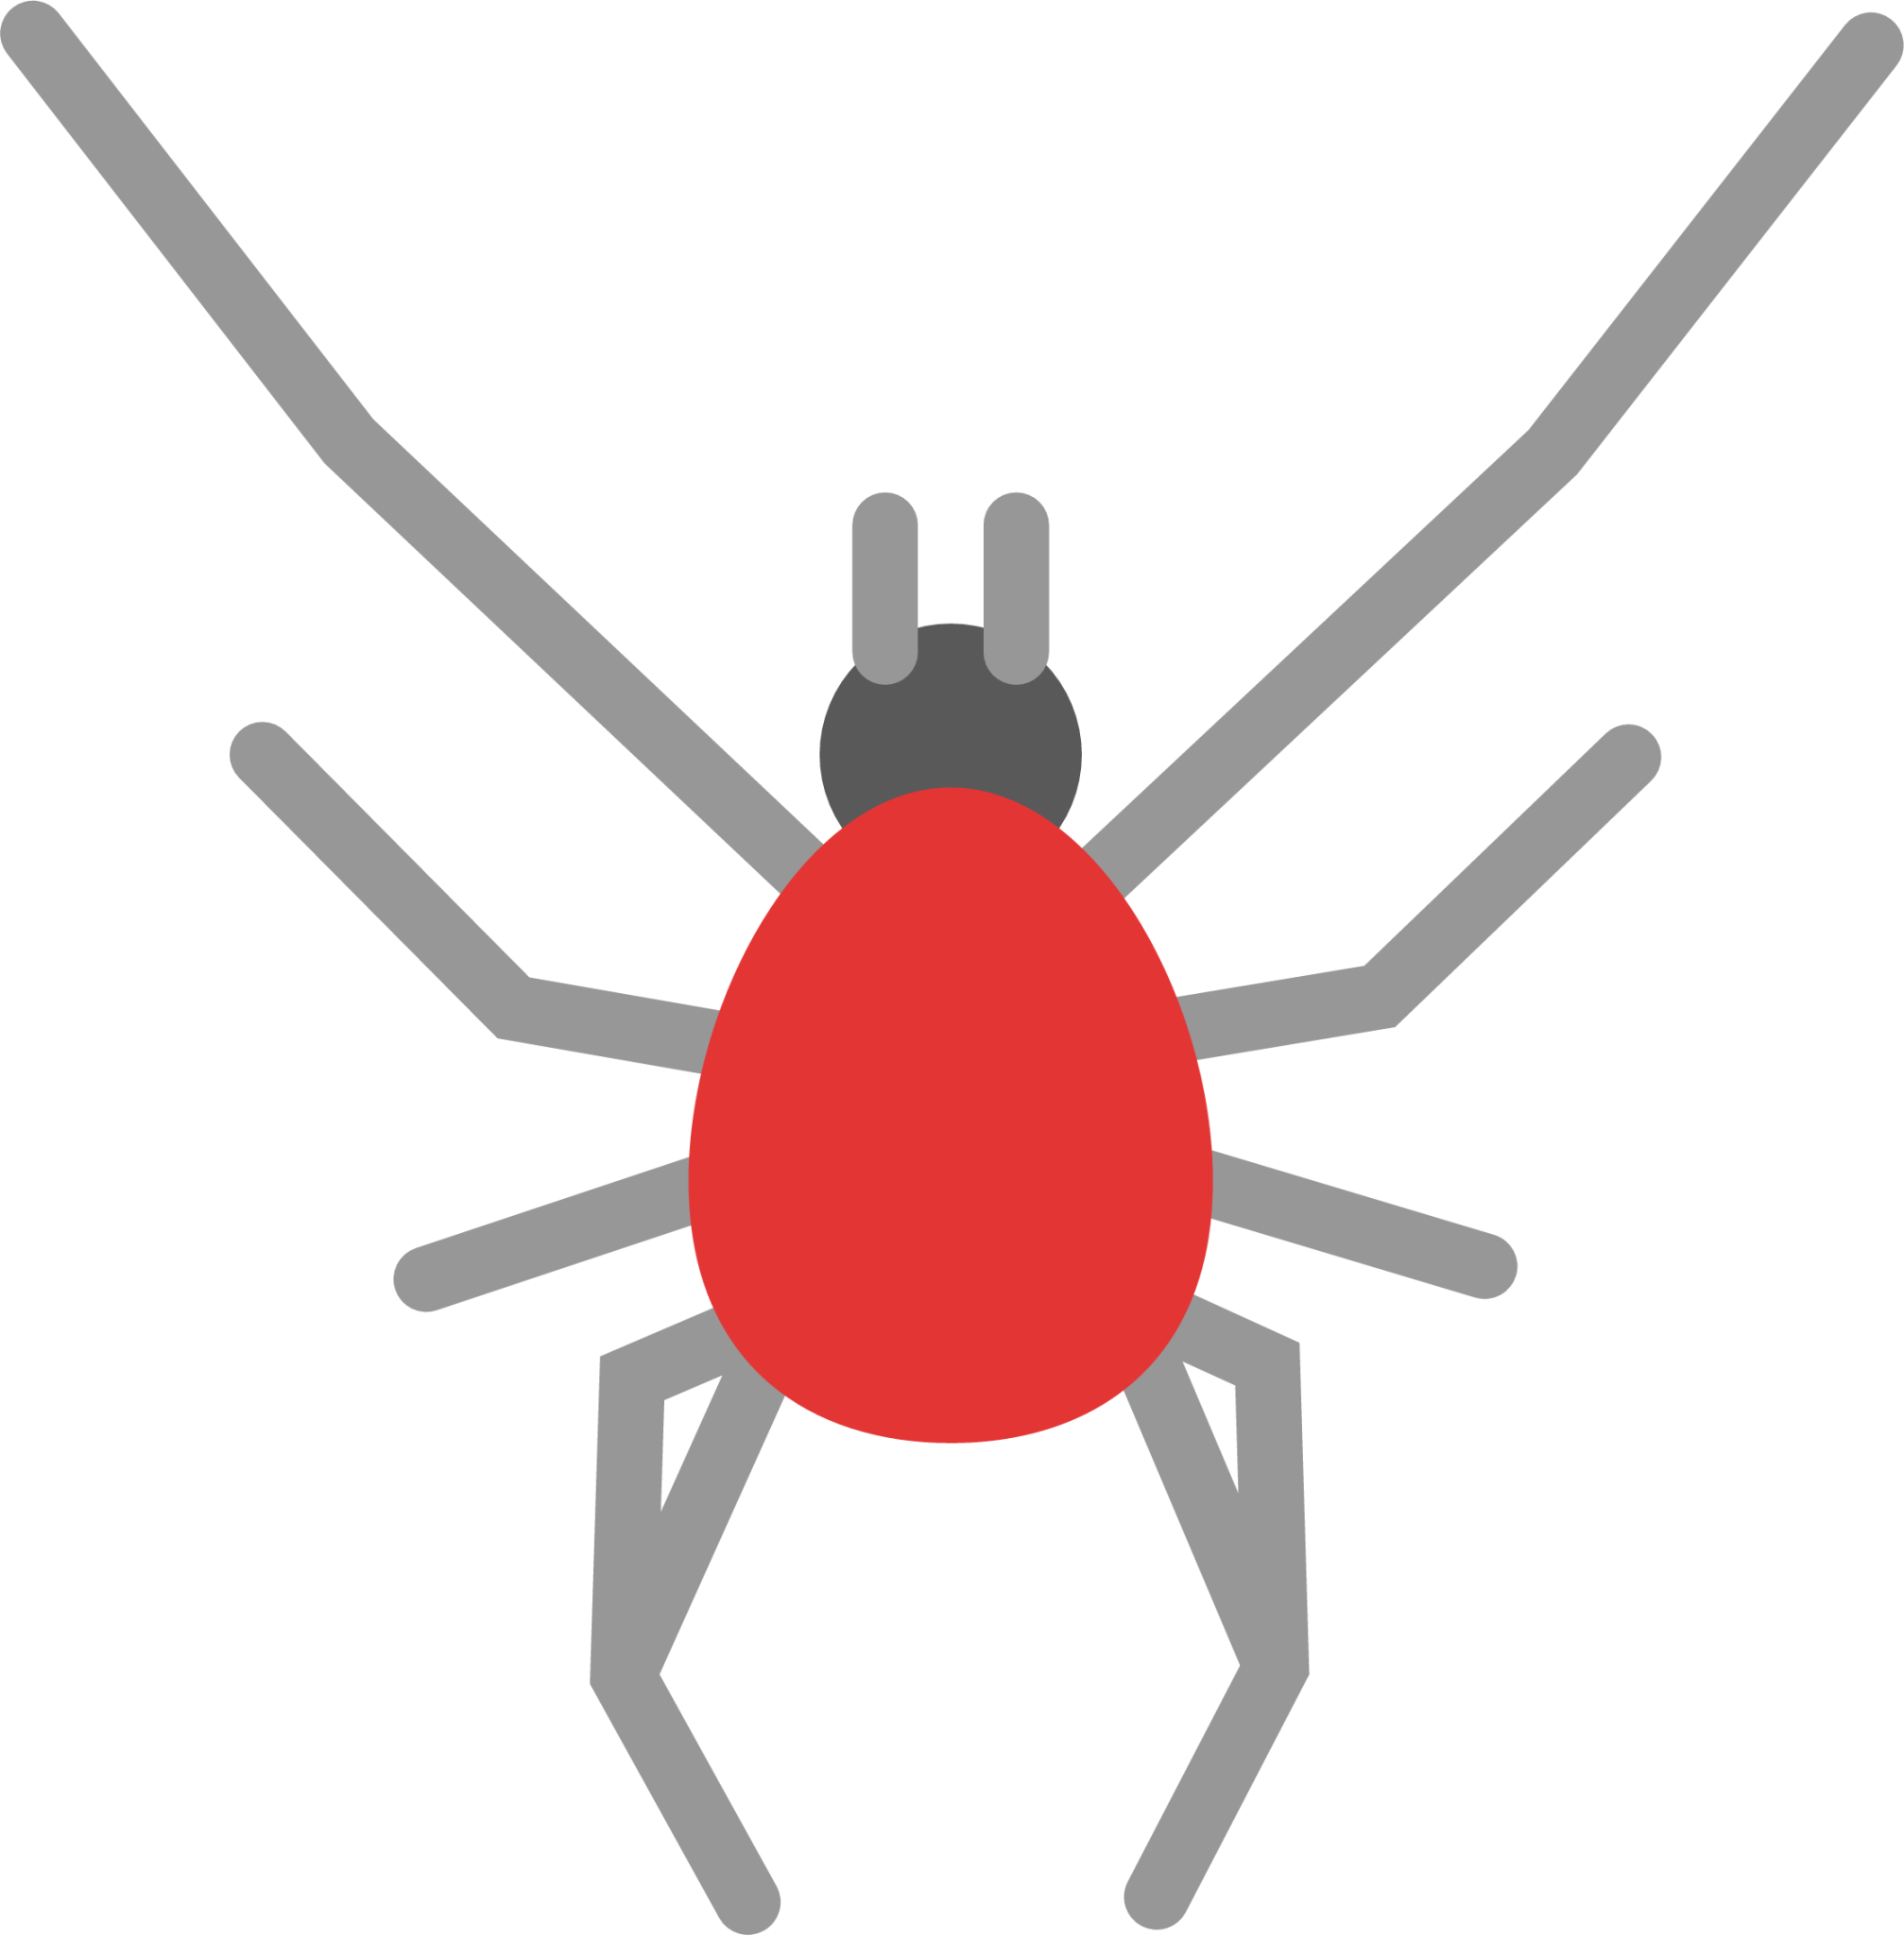 red spider icon